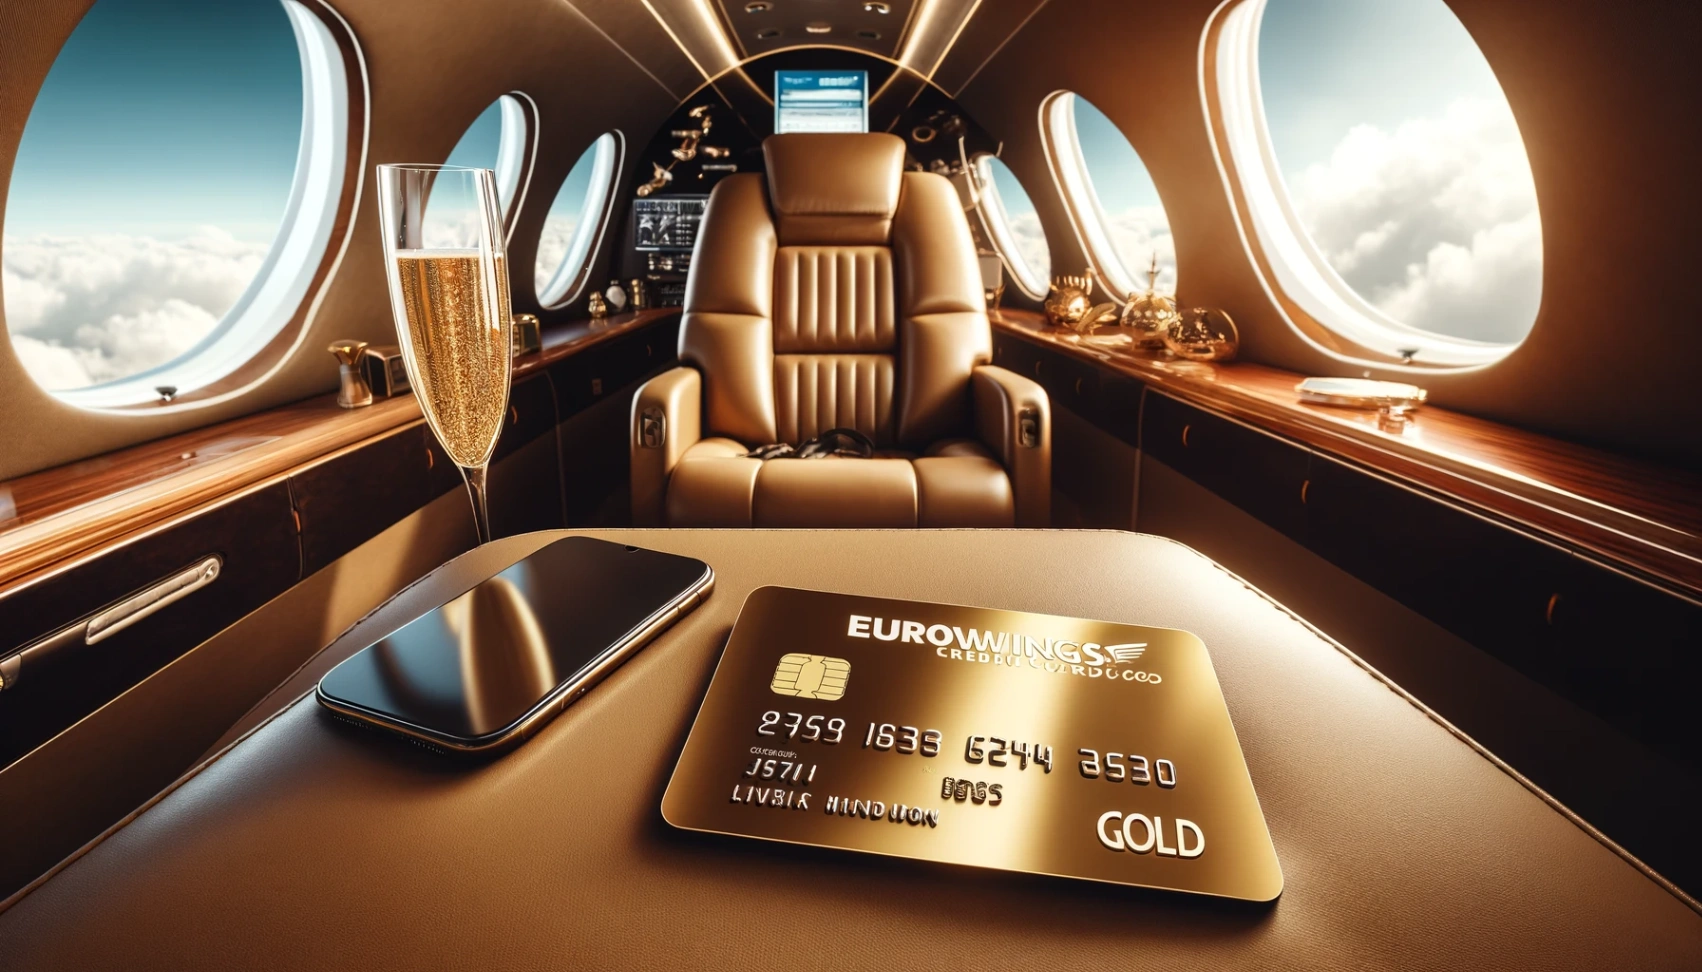 Eurowings Credit Card Gold: How to Apply Online